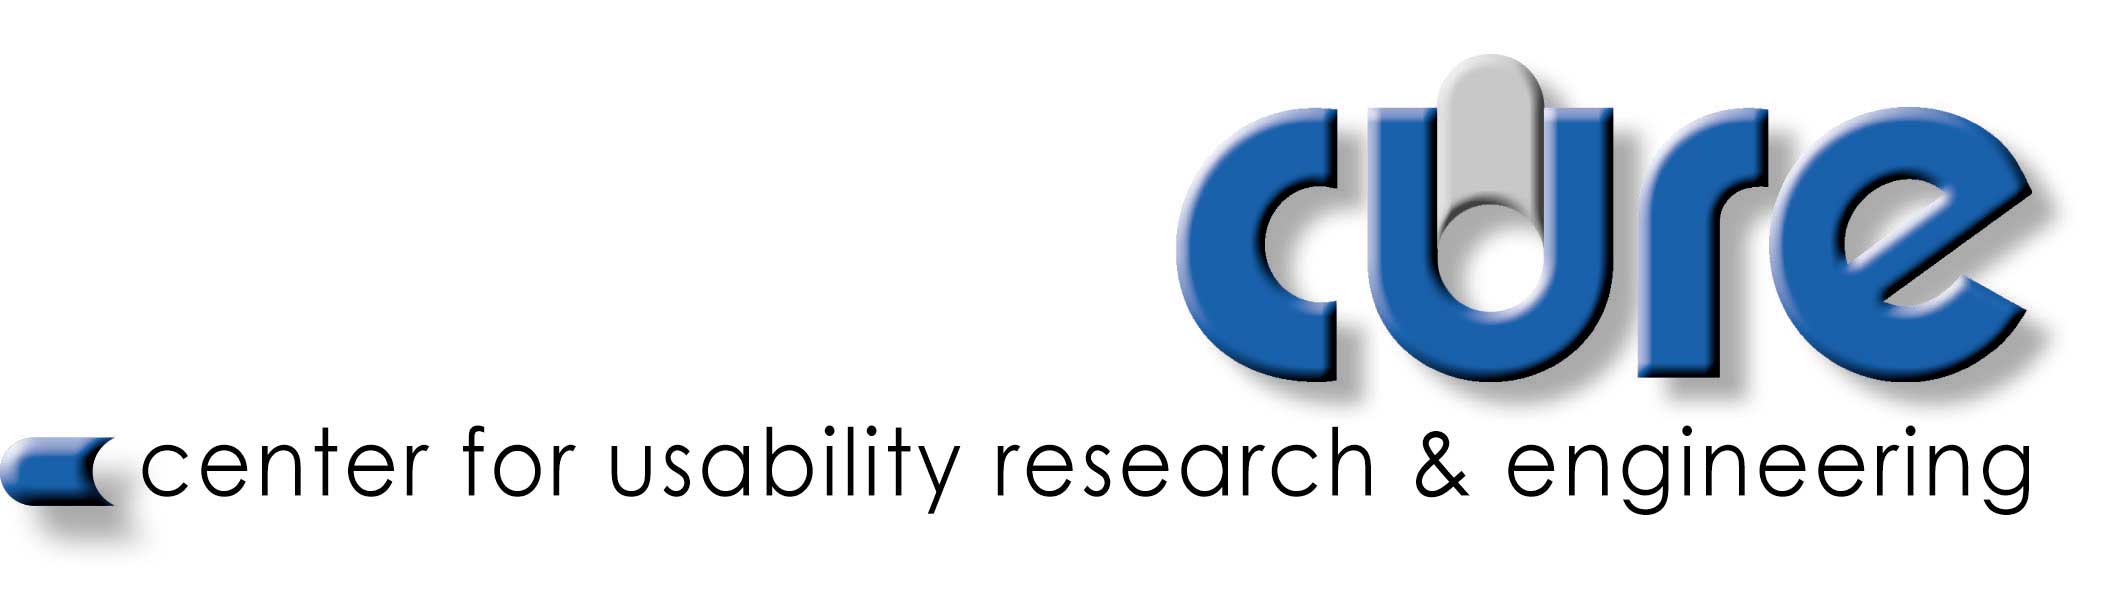 CURE - Center for Usability Research & Engineering